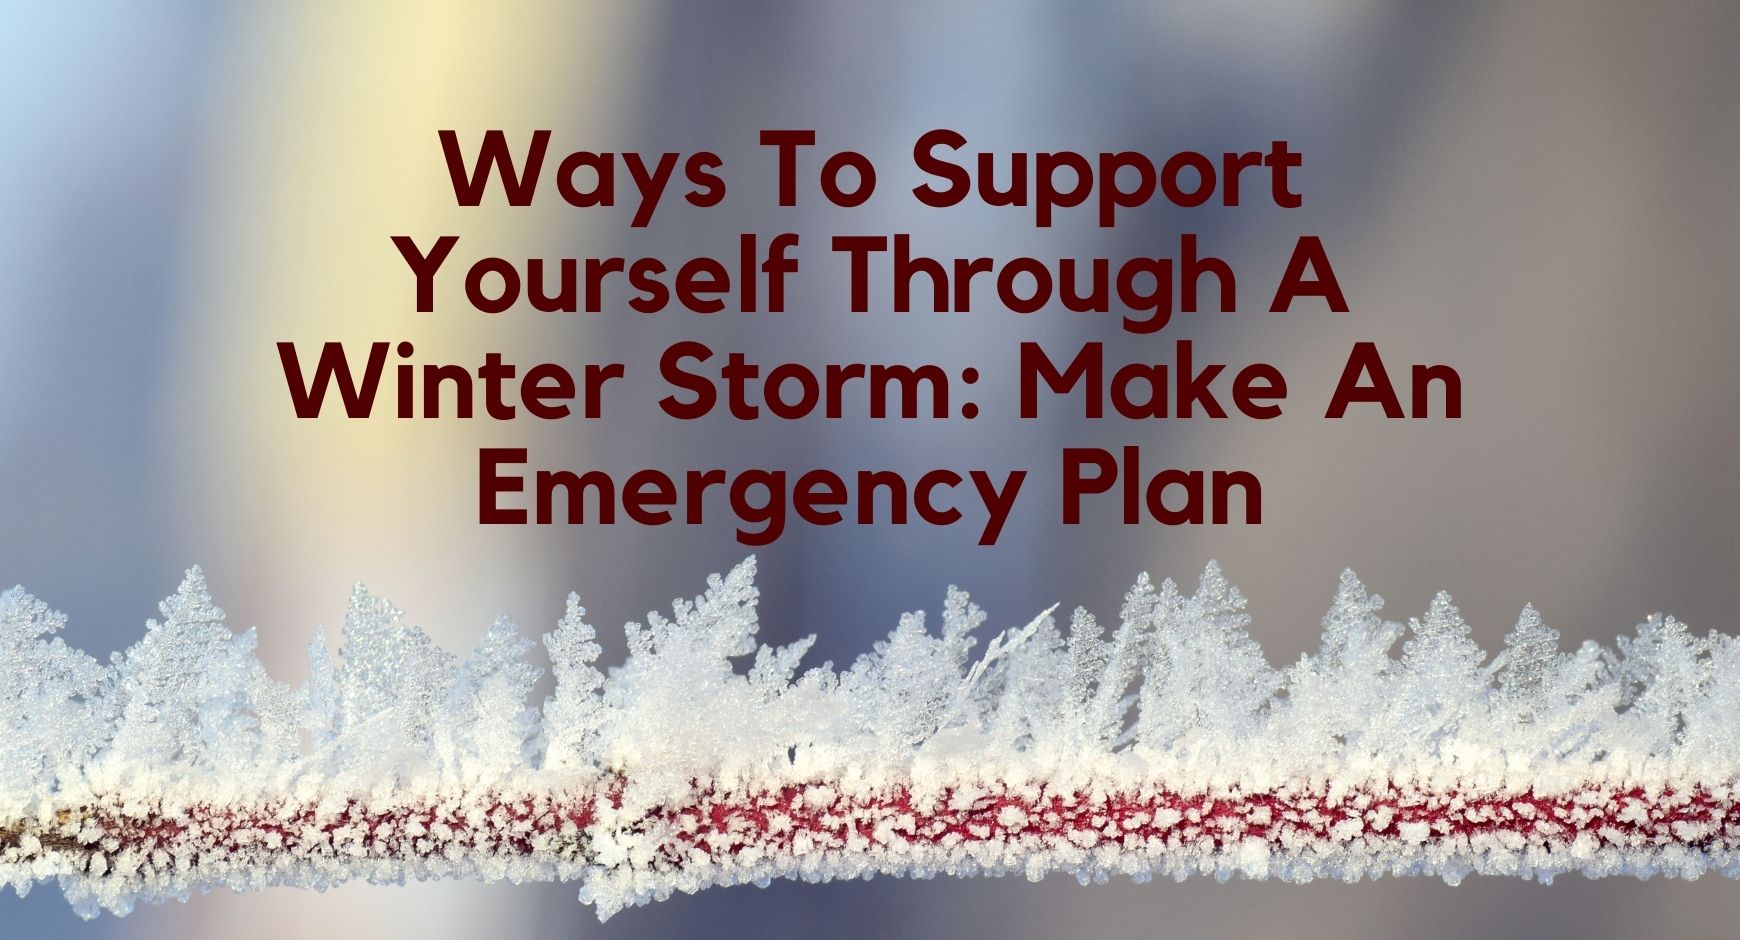 A frozen tree branch next to words that read "Ways To Support Yourself Through A Winter Storm Make An Emergency Plan"